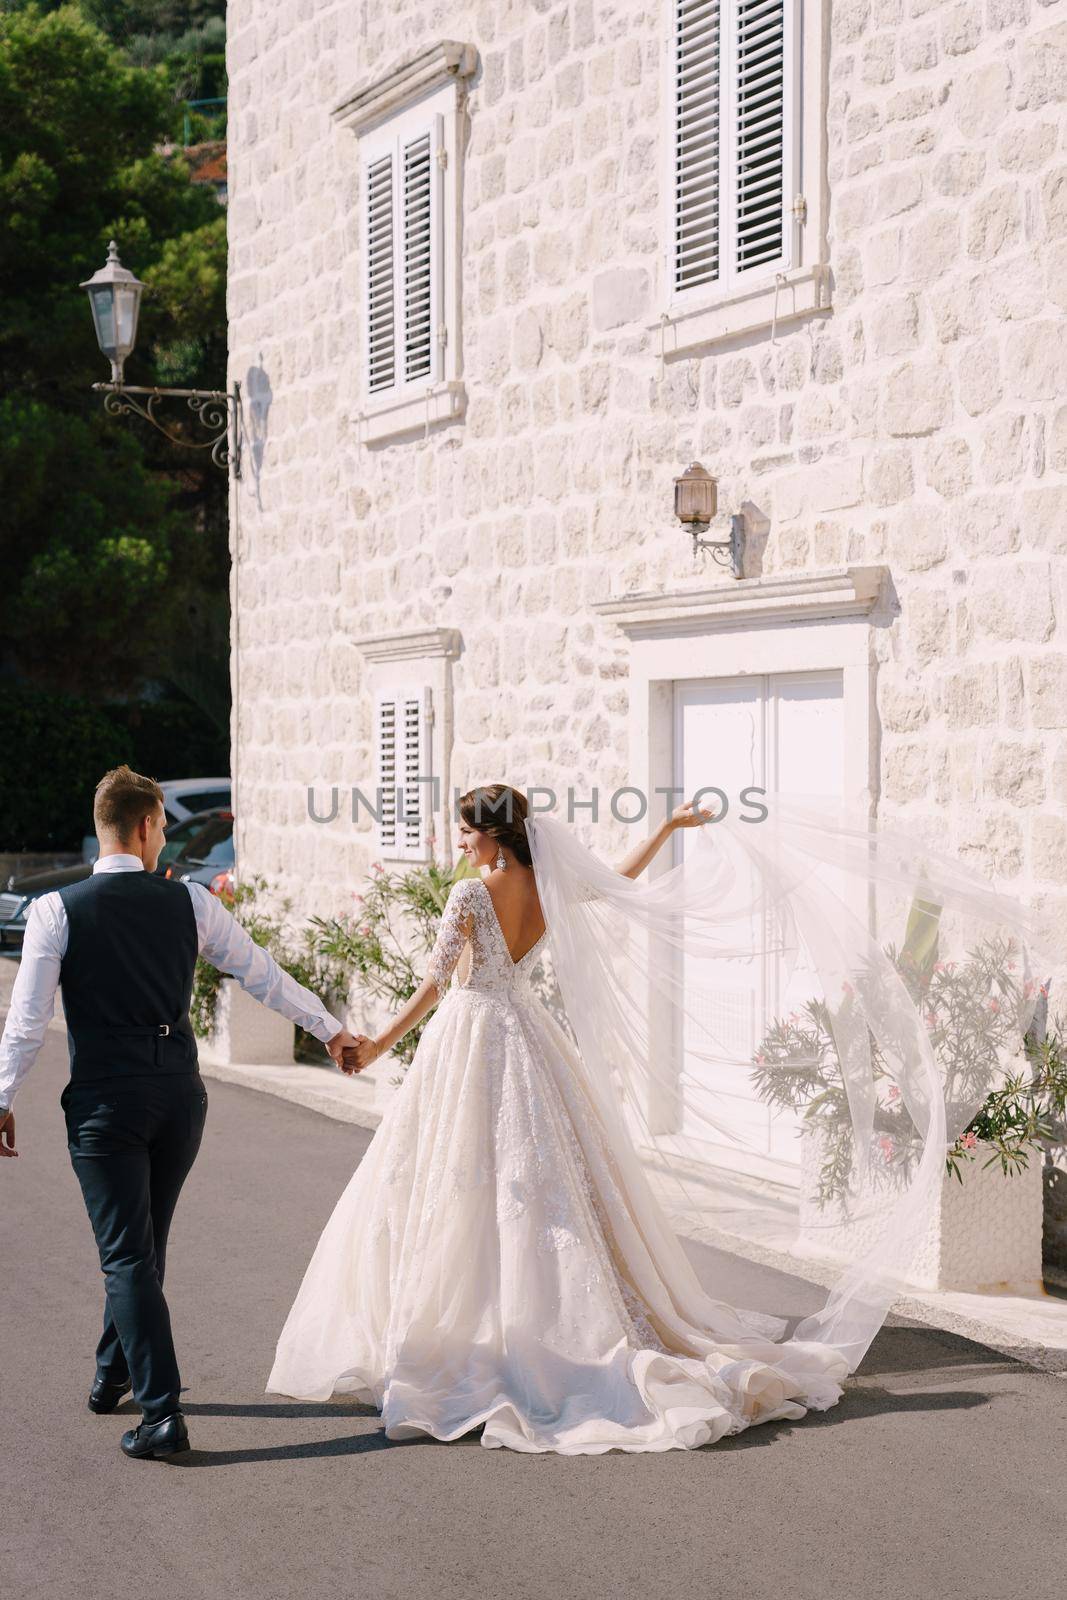 Fine-art wedding photo in Montenegro, Perast. Wedding couple walks along the embankment against the background of a white old house, the bride waves a long veil, the groom holds her hand.